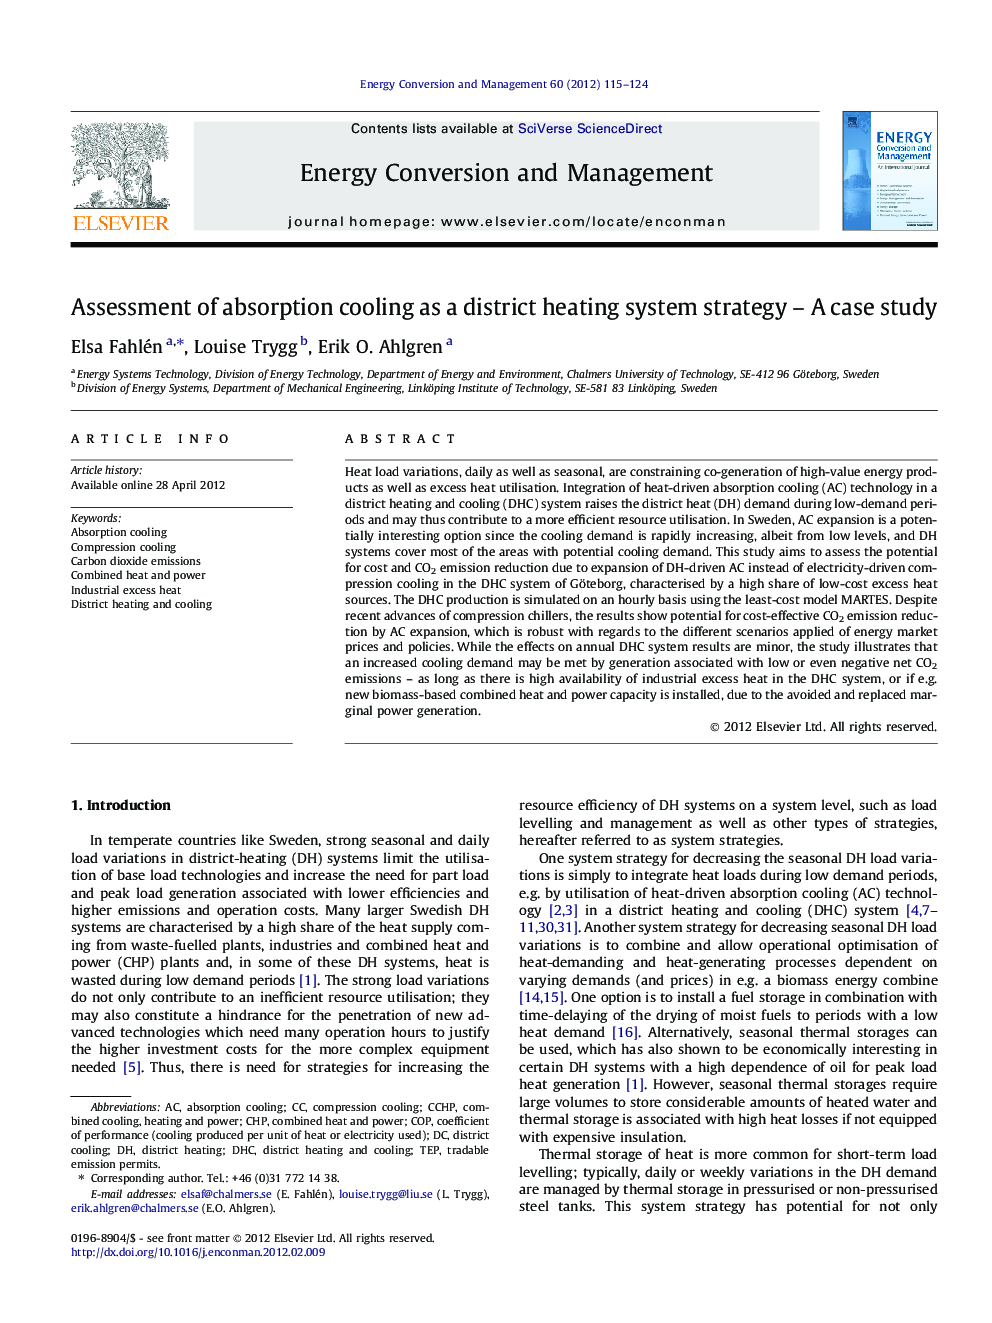 Assessment of absorption cooling as a district heating system strategy – A case study